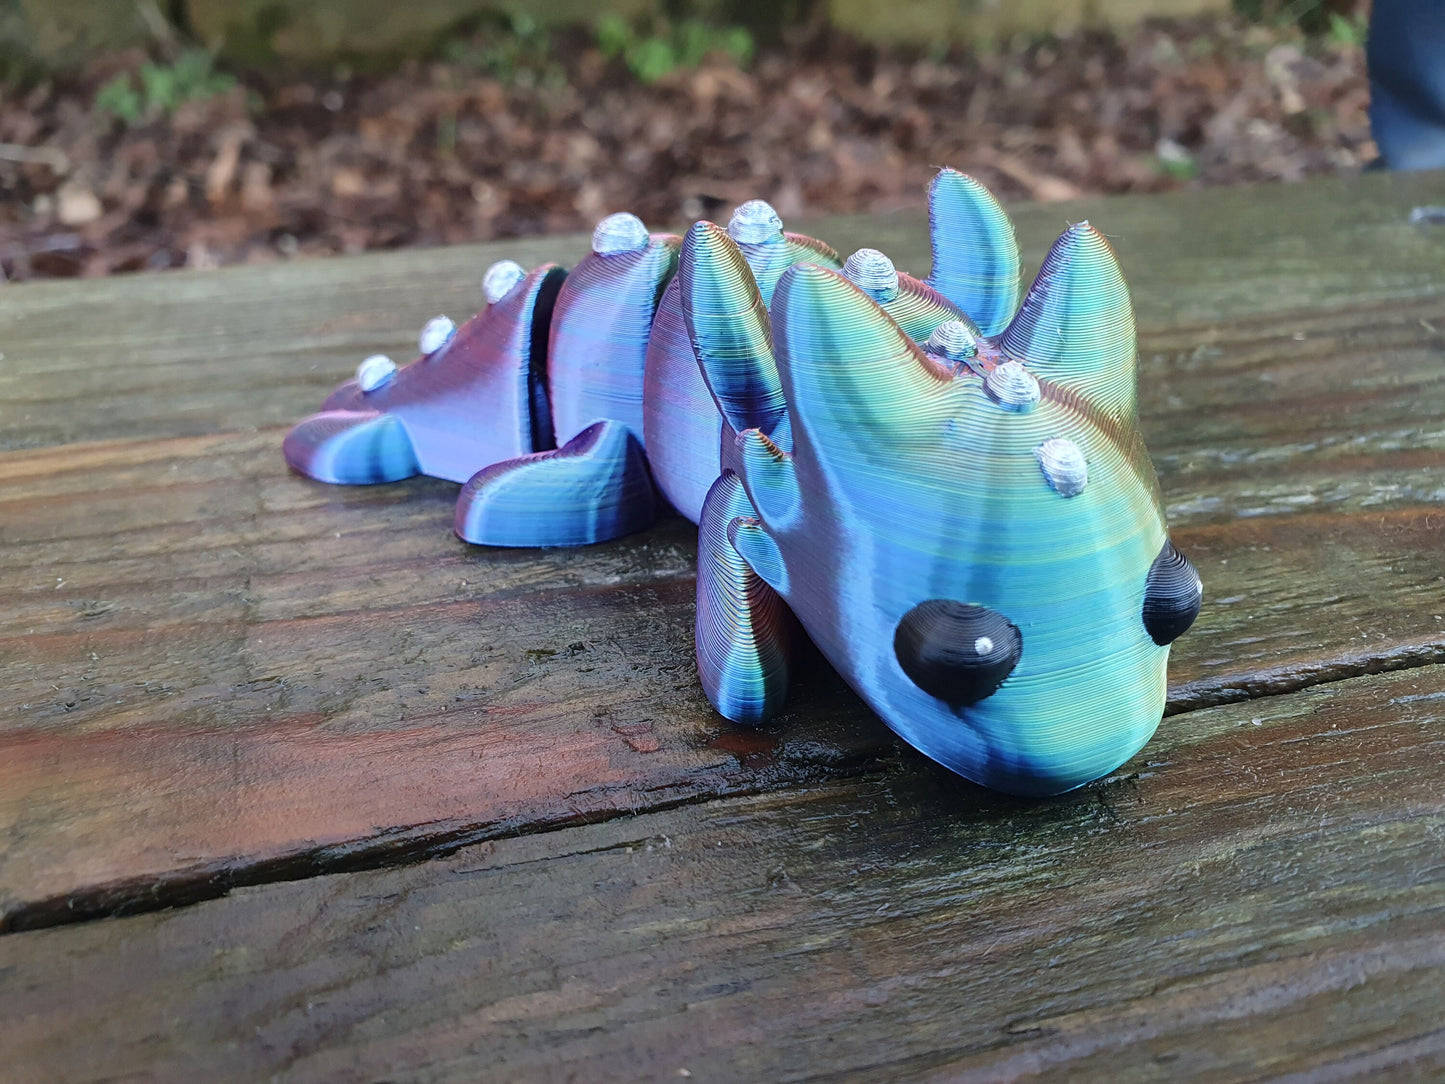 Cute Baby Dragon - Articulated Flexible 3D Print. Professionally Hand painted finishing details